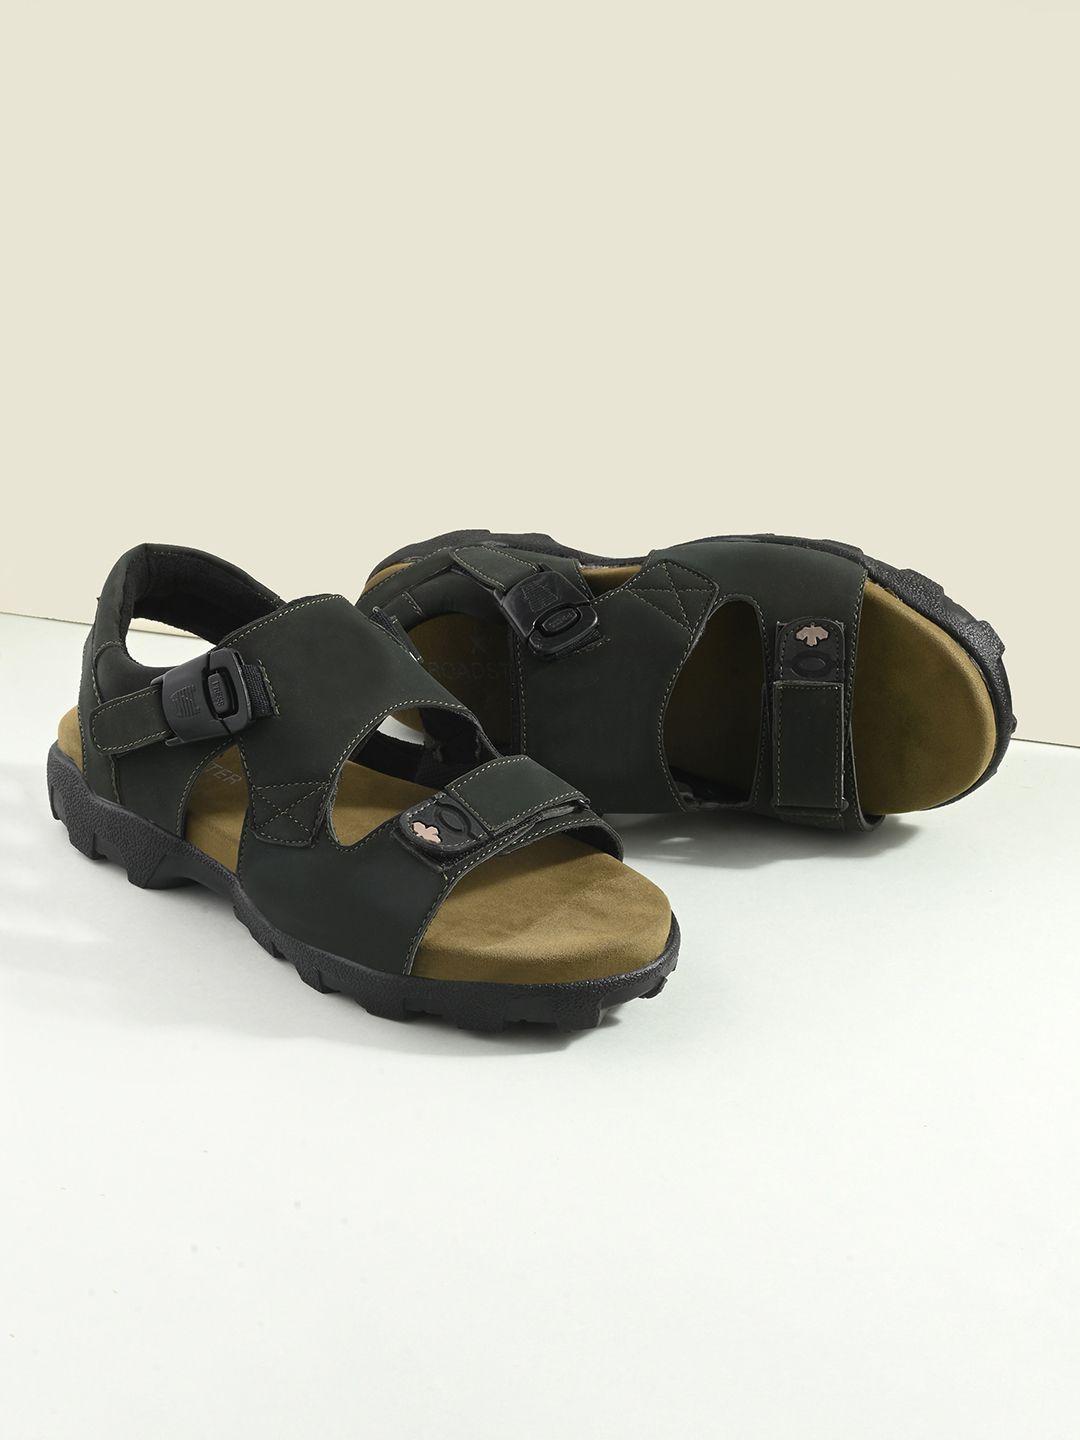 the roadster lifestyle co. men anti skid sports sandals